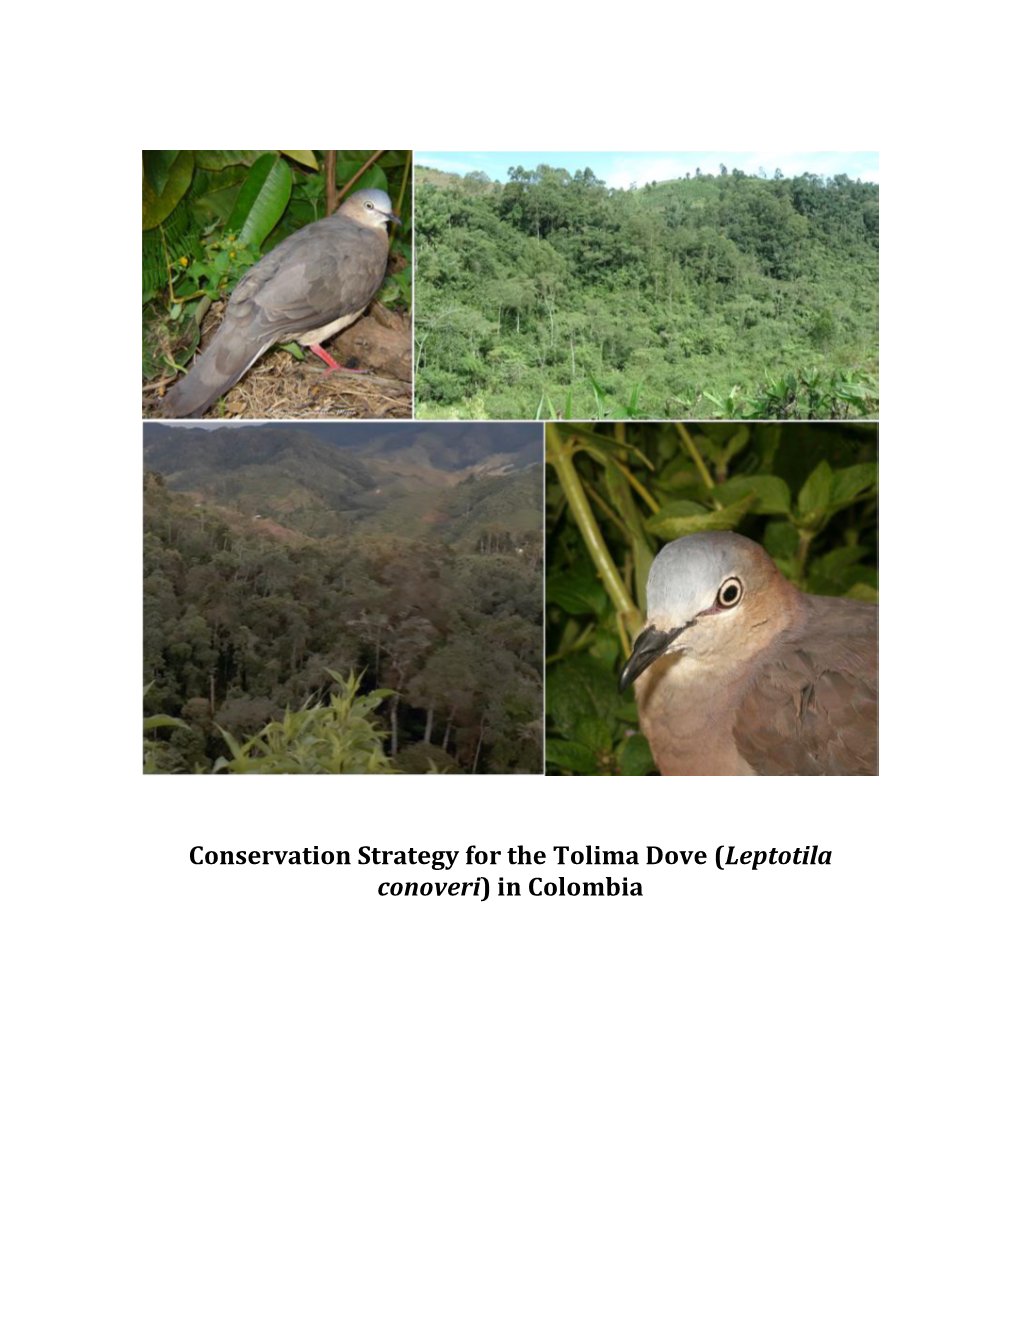 Conservation Strategy for the Tolima Dove (Leptotila Conoveri) in Colombia